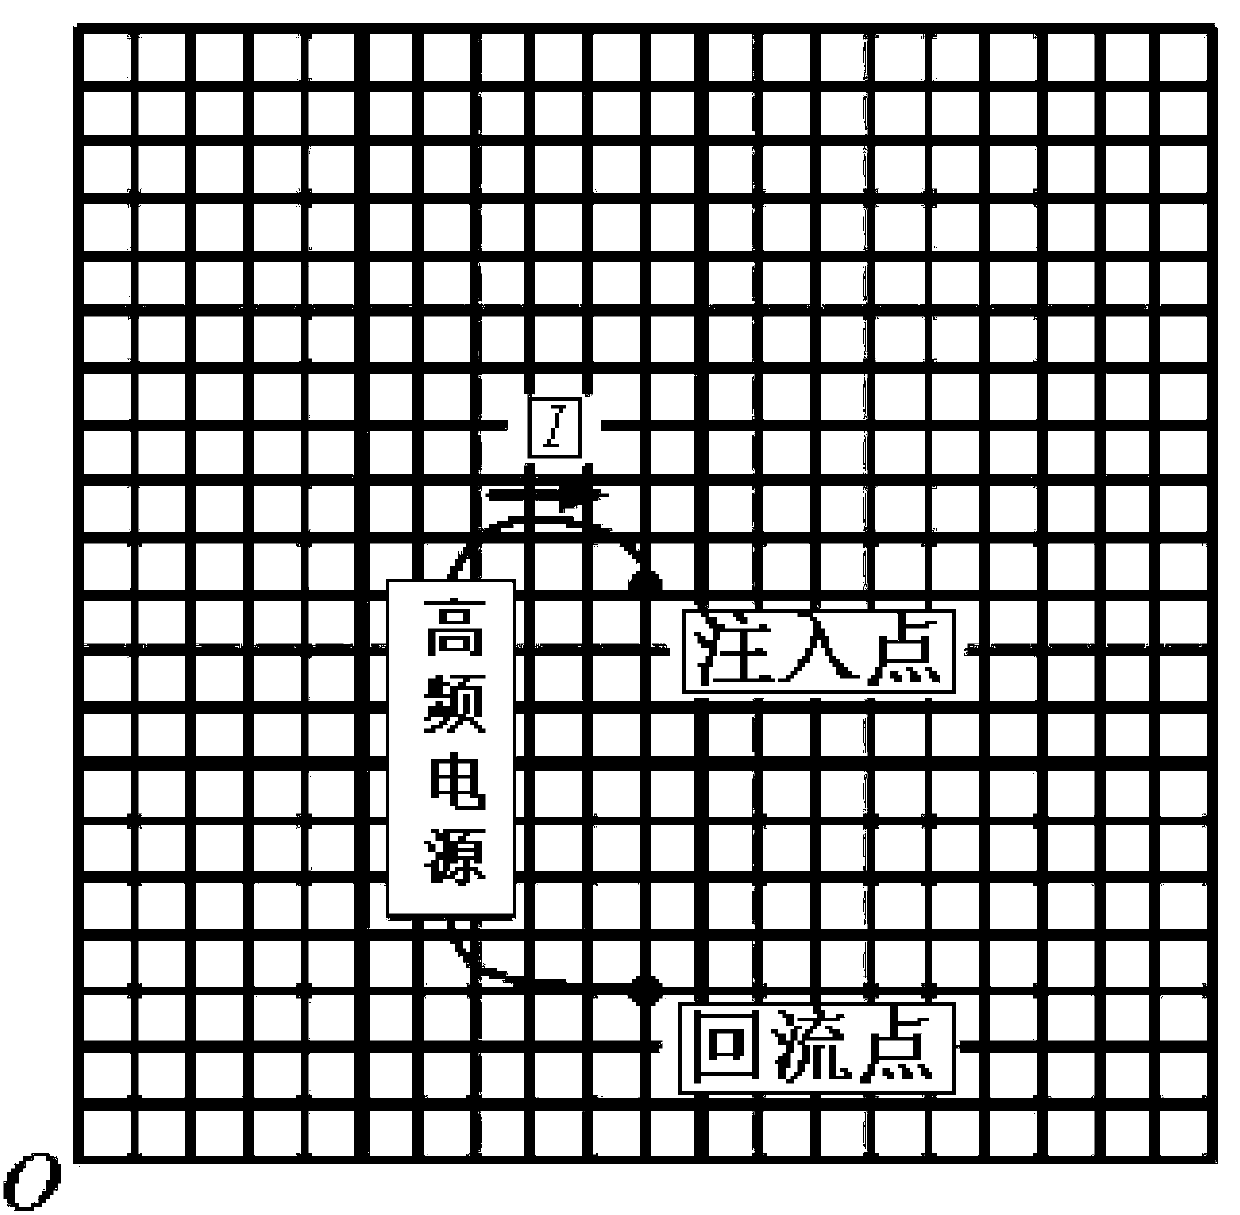 Large-scale grounding grid high-frequency characteristic test method using grounding grid current reflow